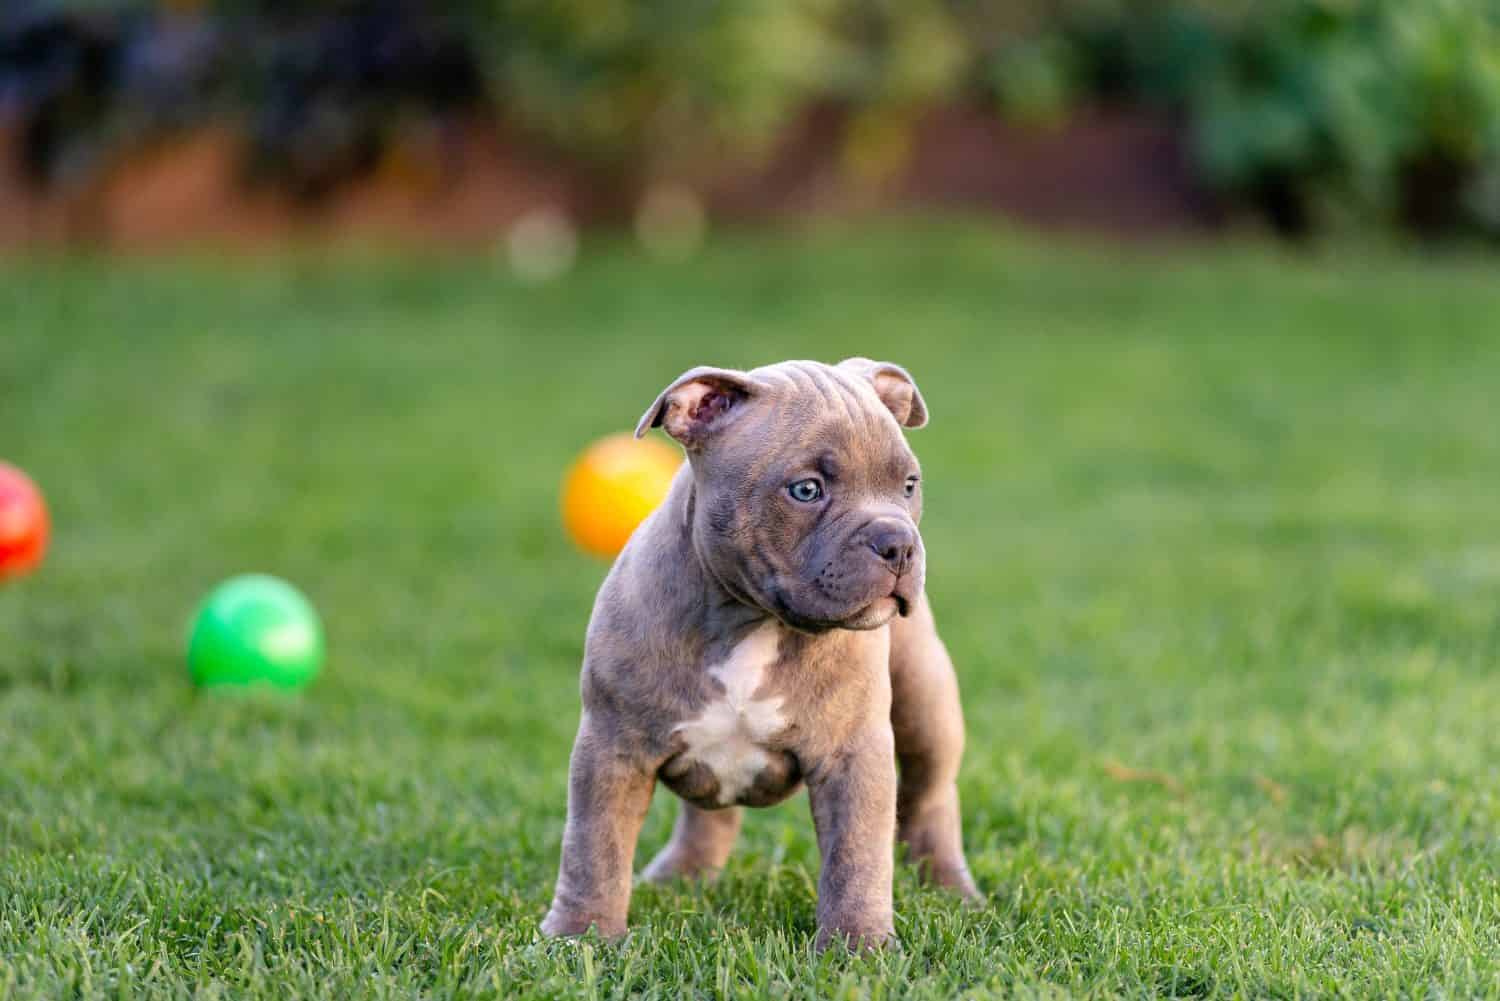 Little american bulli puppy walks on the grass in the park.